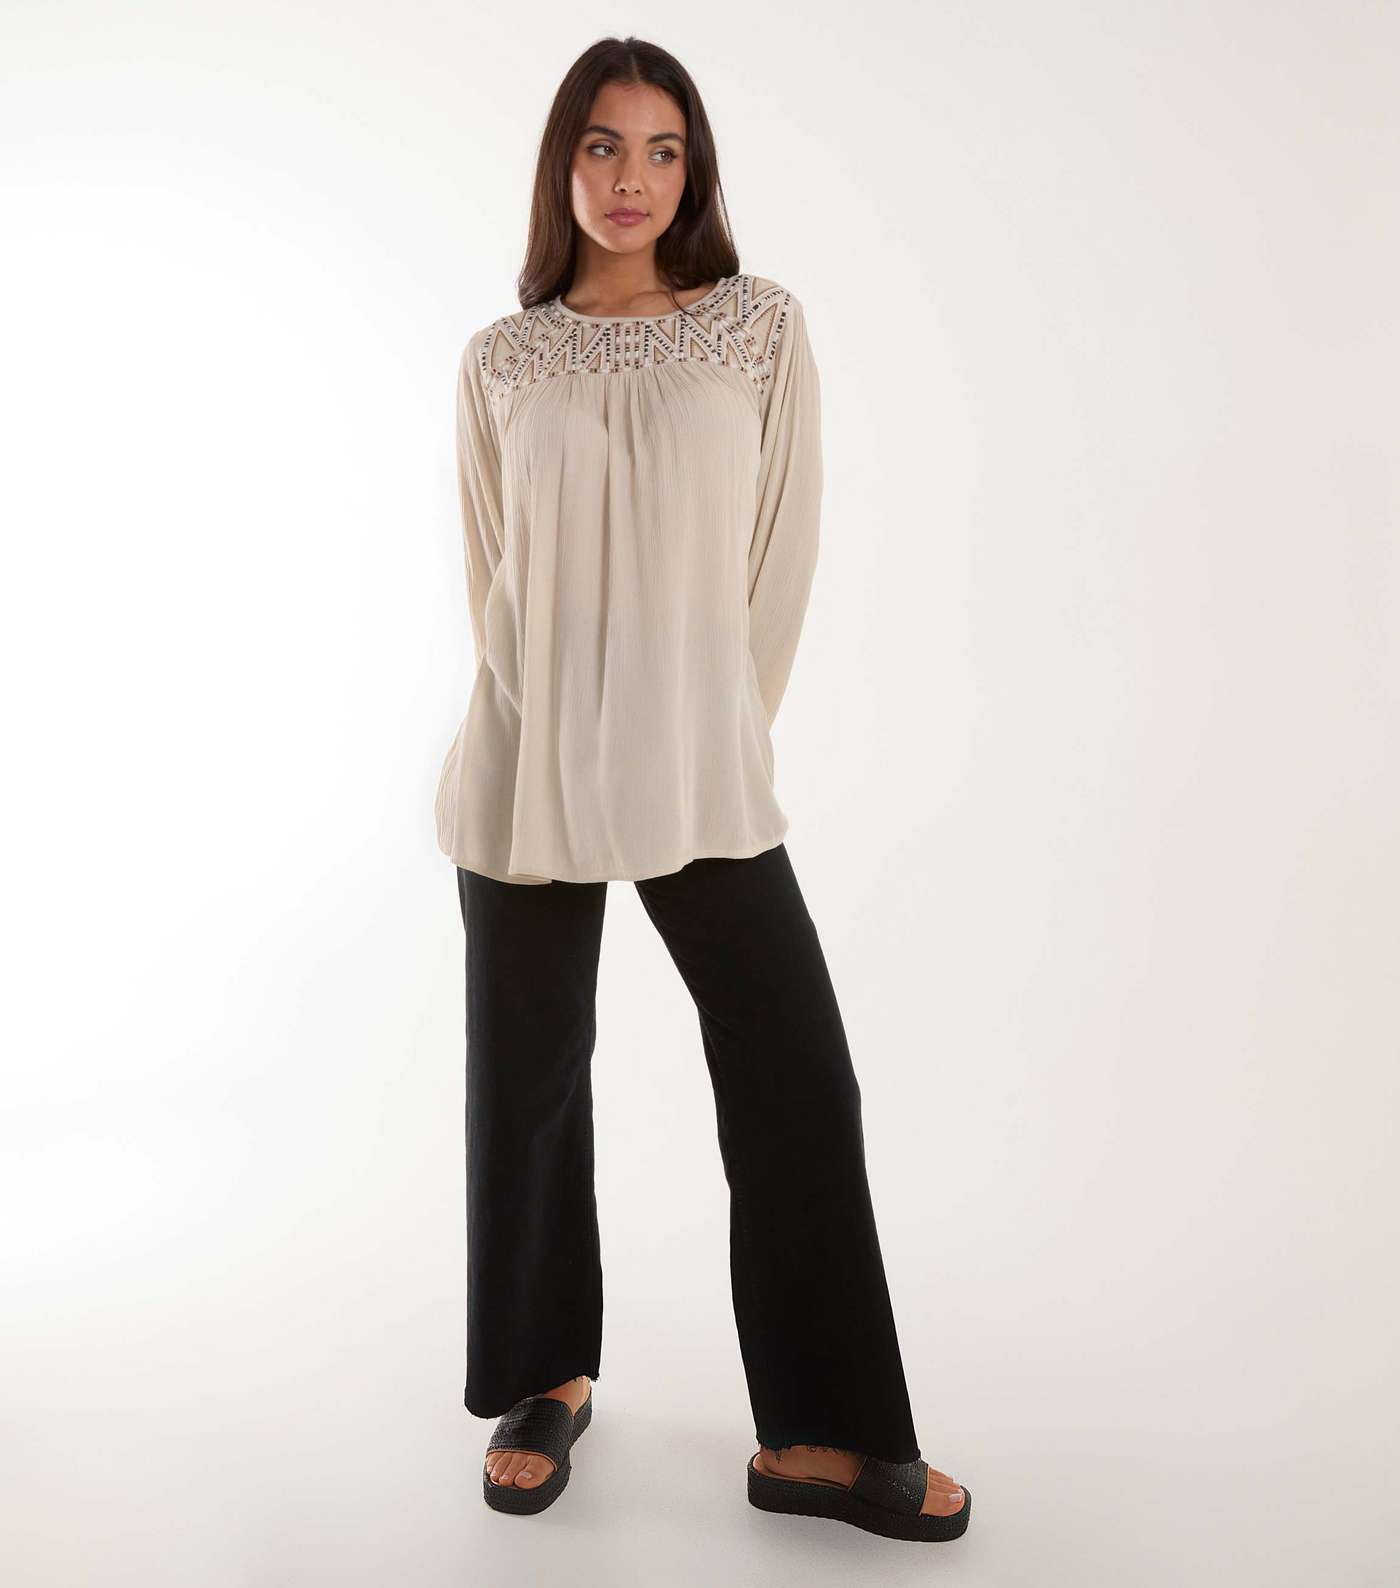 Blue Vanilla Stone Embroidered Long Sleeve Top Image 2